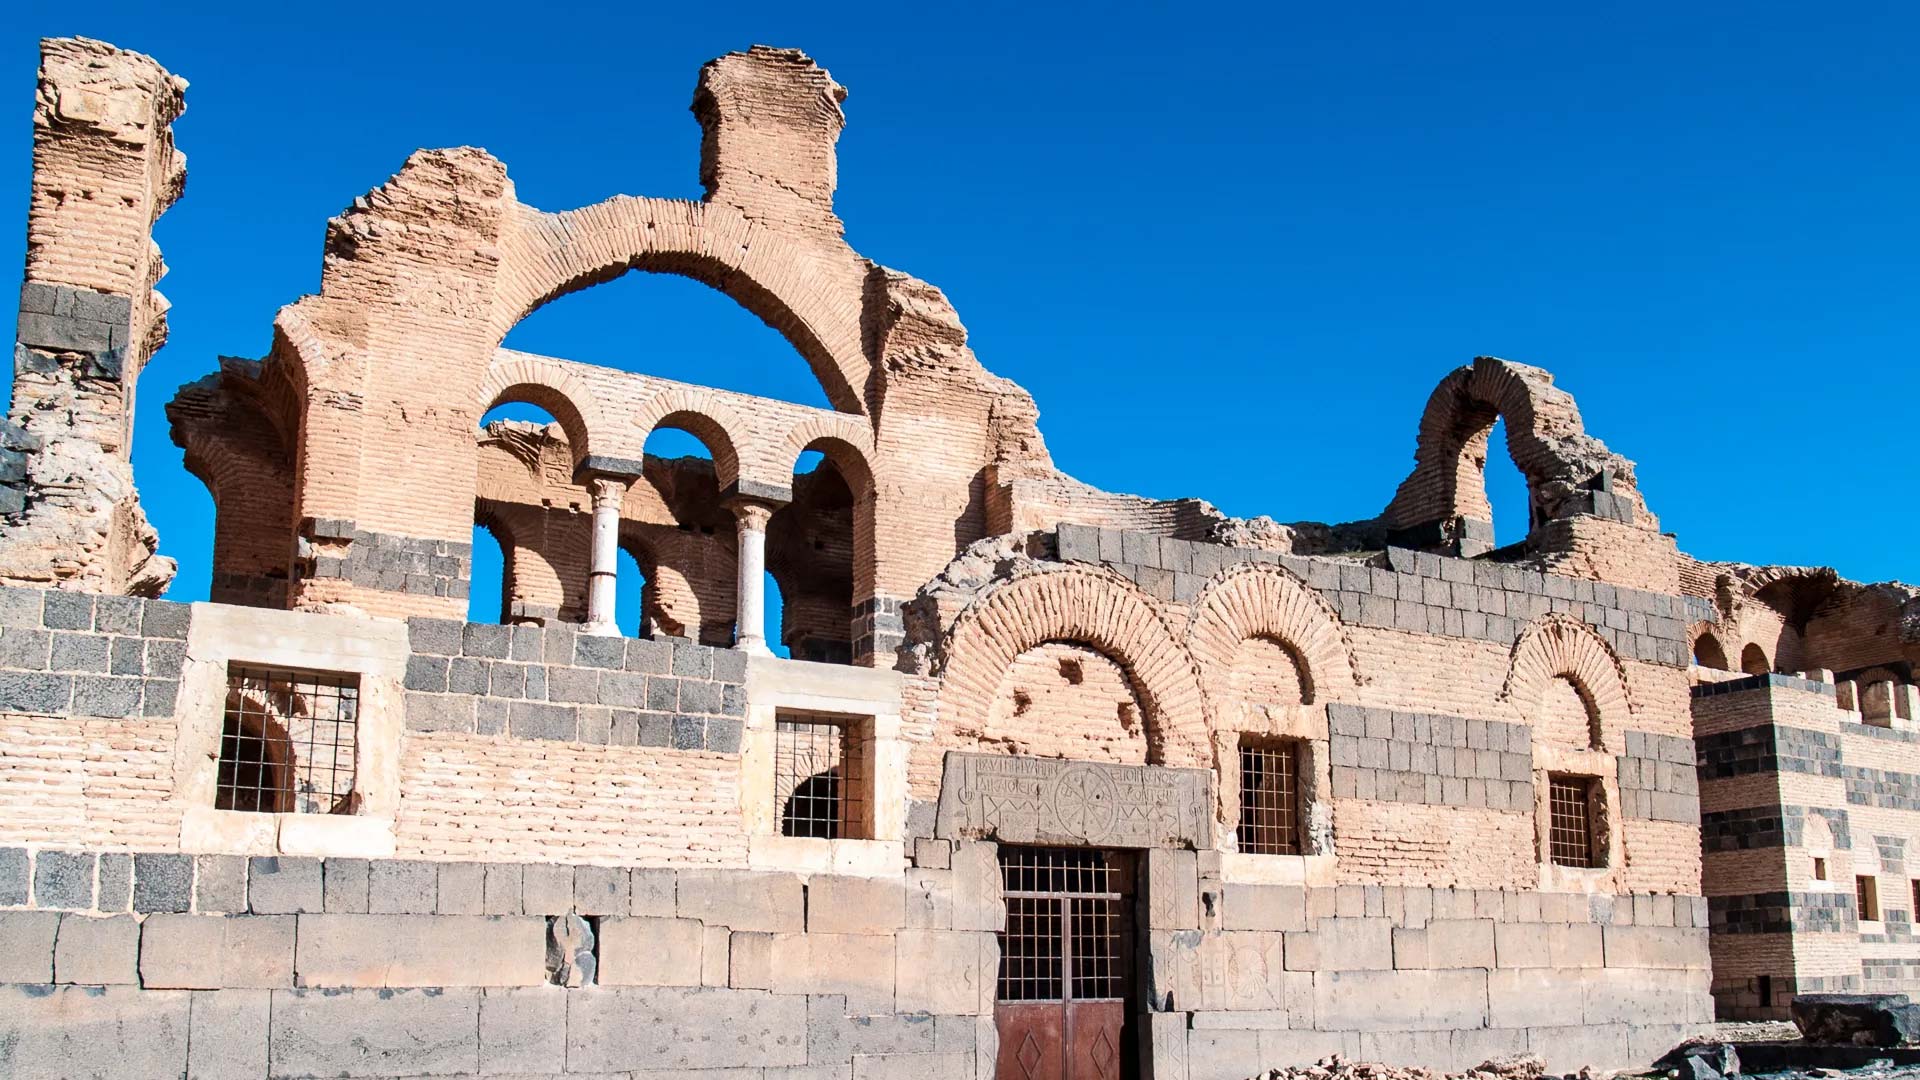 A photograph captures the impressive stone facade of Qasr Ibn Wardan, a remarkable architectural marvel that serves as a testament to the defensive prowess and grandeur of the Byzantine Empire.